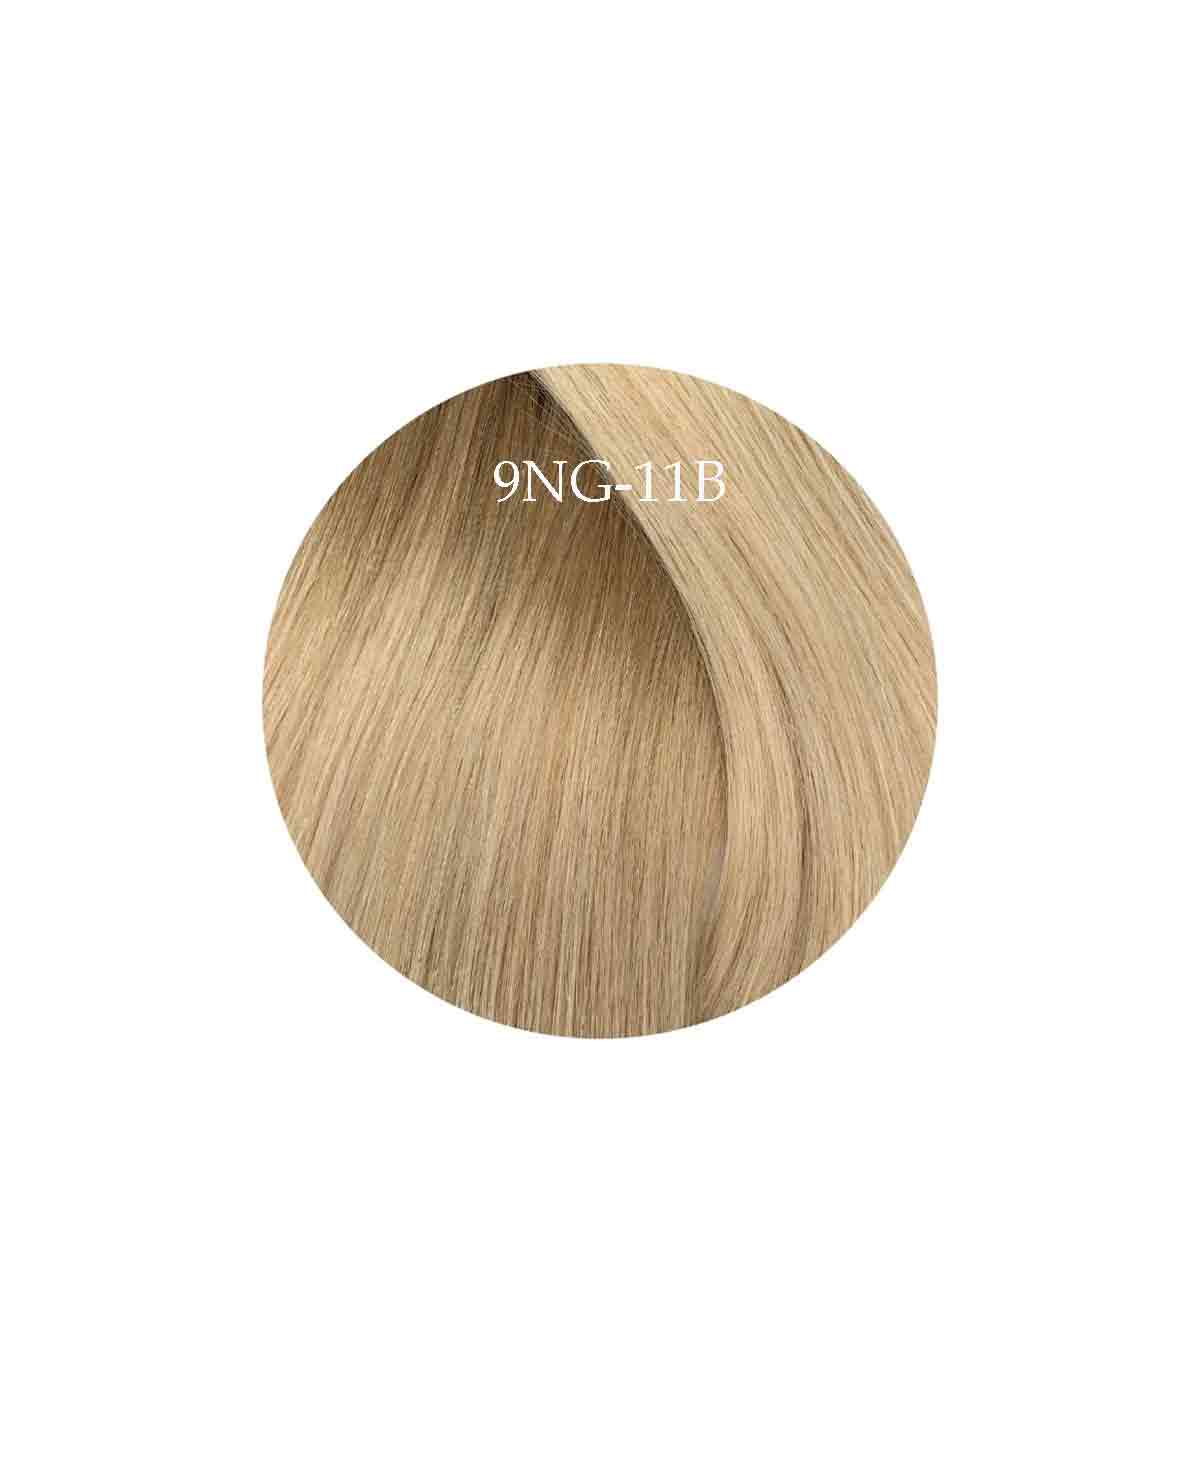 Showpony 45-50cm (20") 3 in 1 HALO Hair Exstension - Ombre - 9NG-11B Sunshine Kiss 